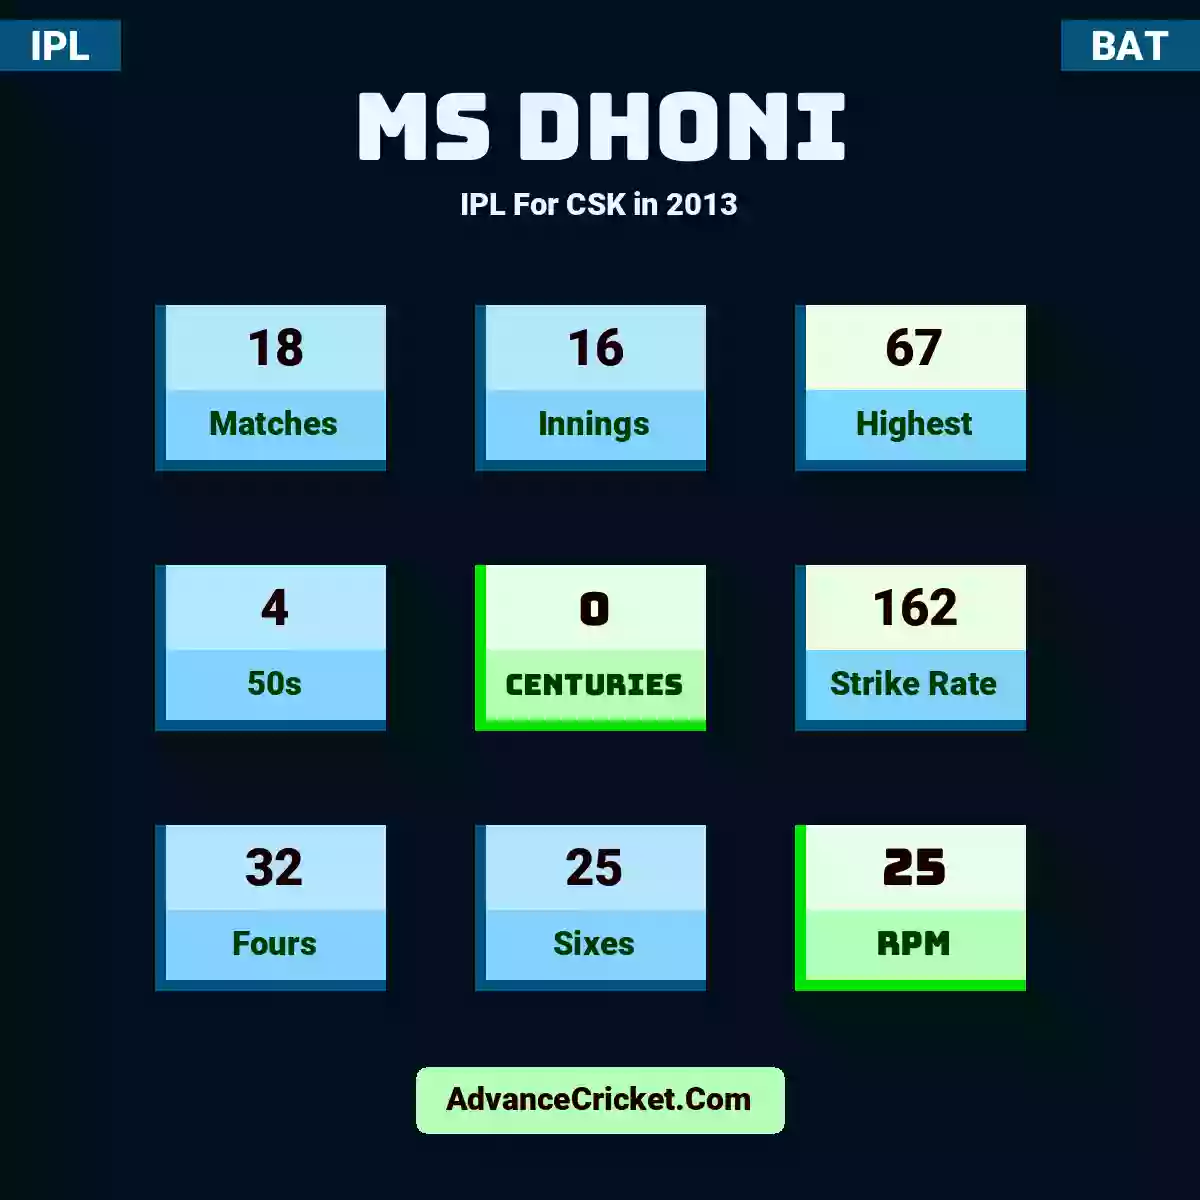 MS Dhoni IPL  For CSK in 2013, MS Dhoni played 18 matches, scored 67 runs as highest, 4 half-centuries, and 0 centuries, with a strike rate of 162. M.Dhoni hit 32 fours and 25 sixes, with an RPM of 25.